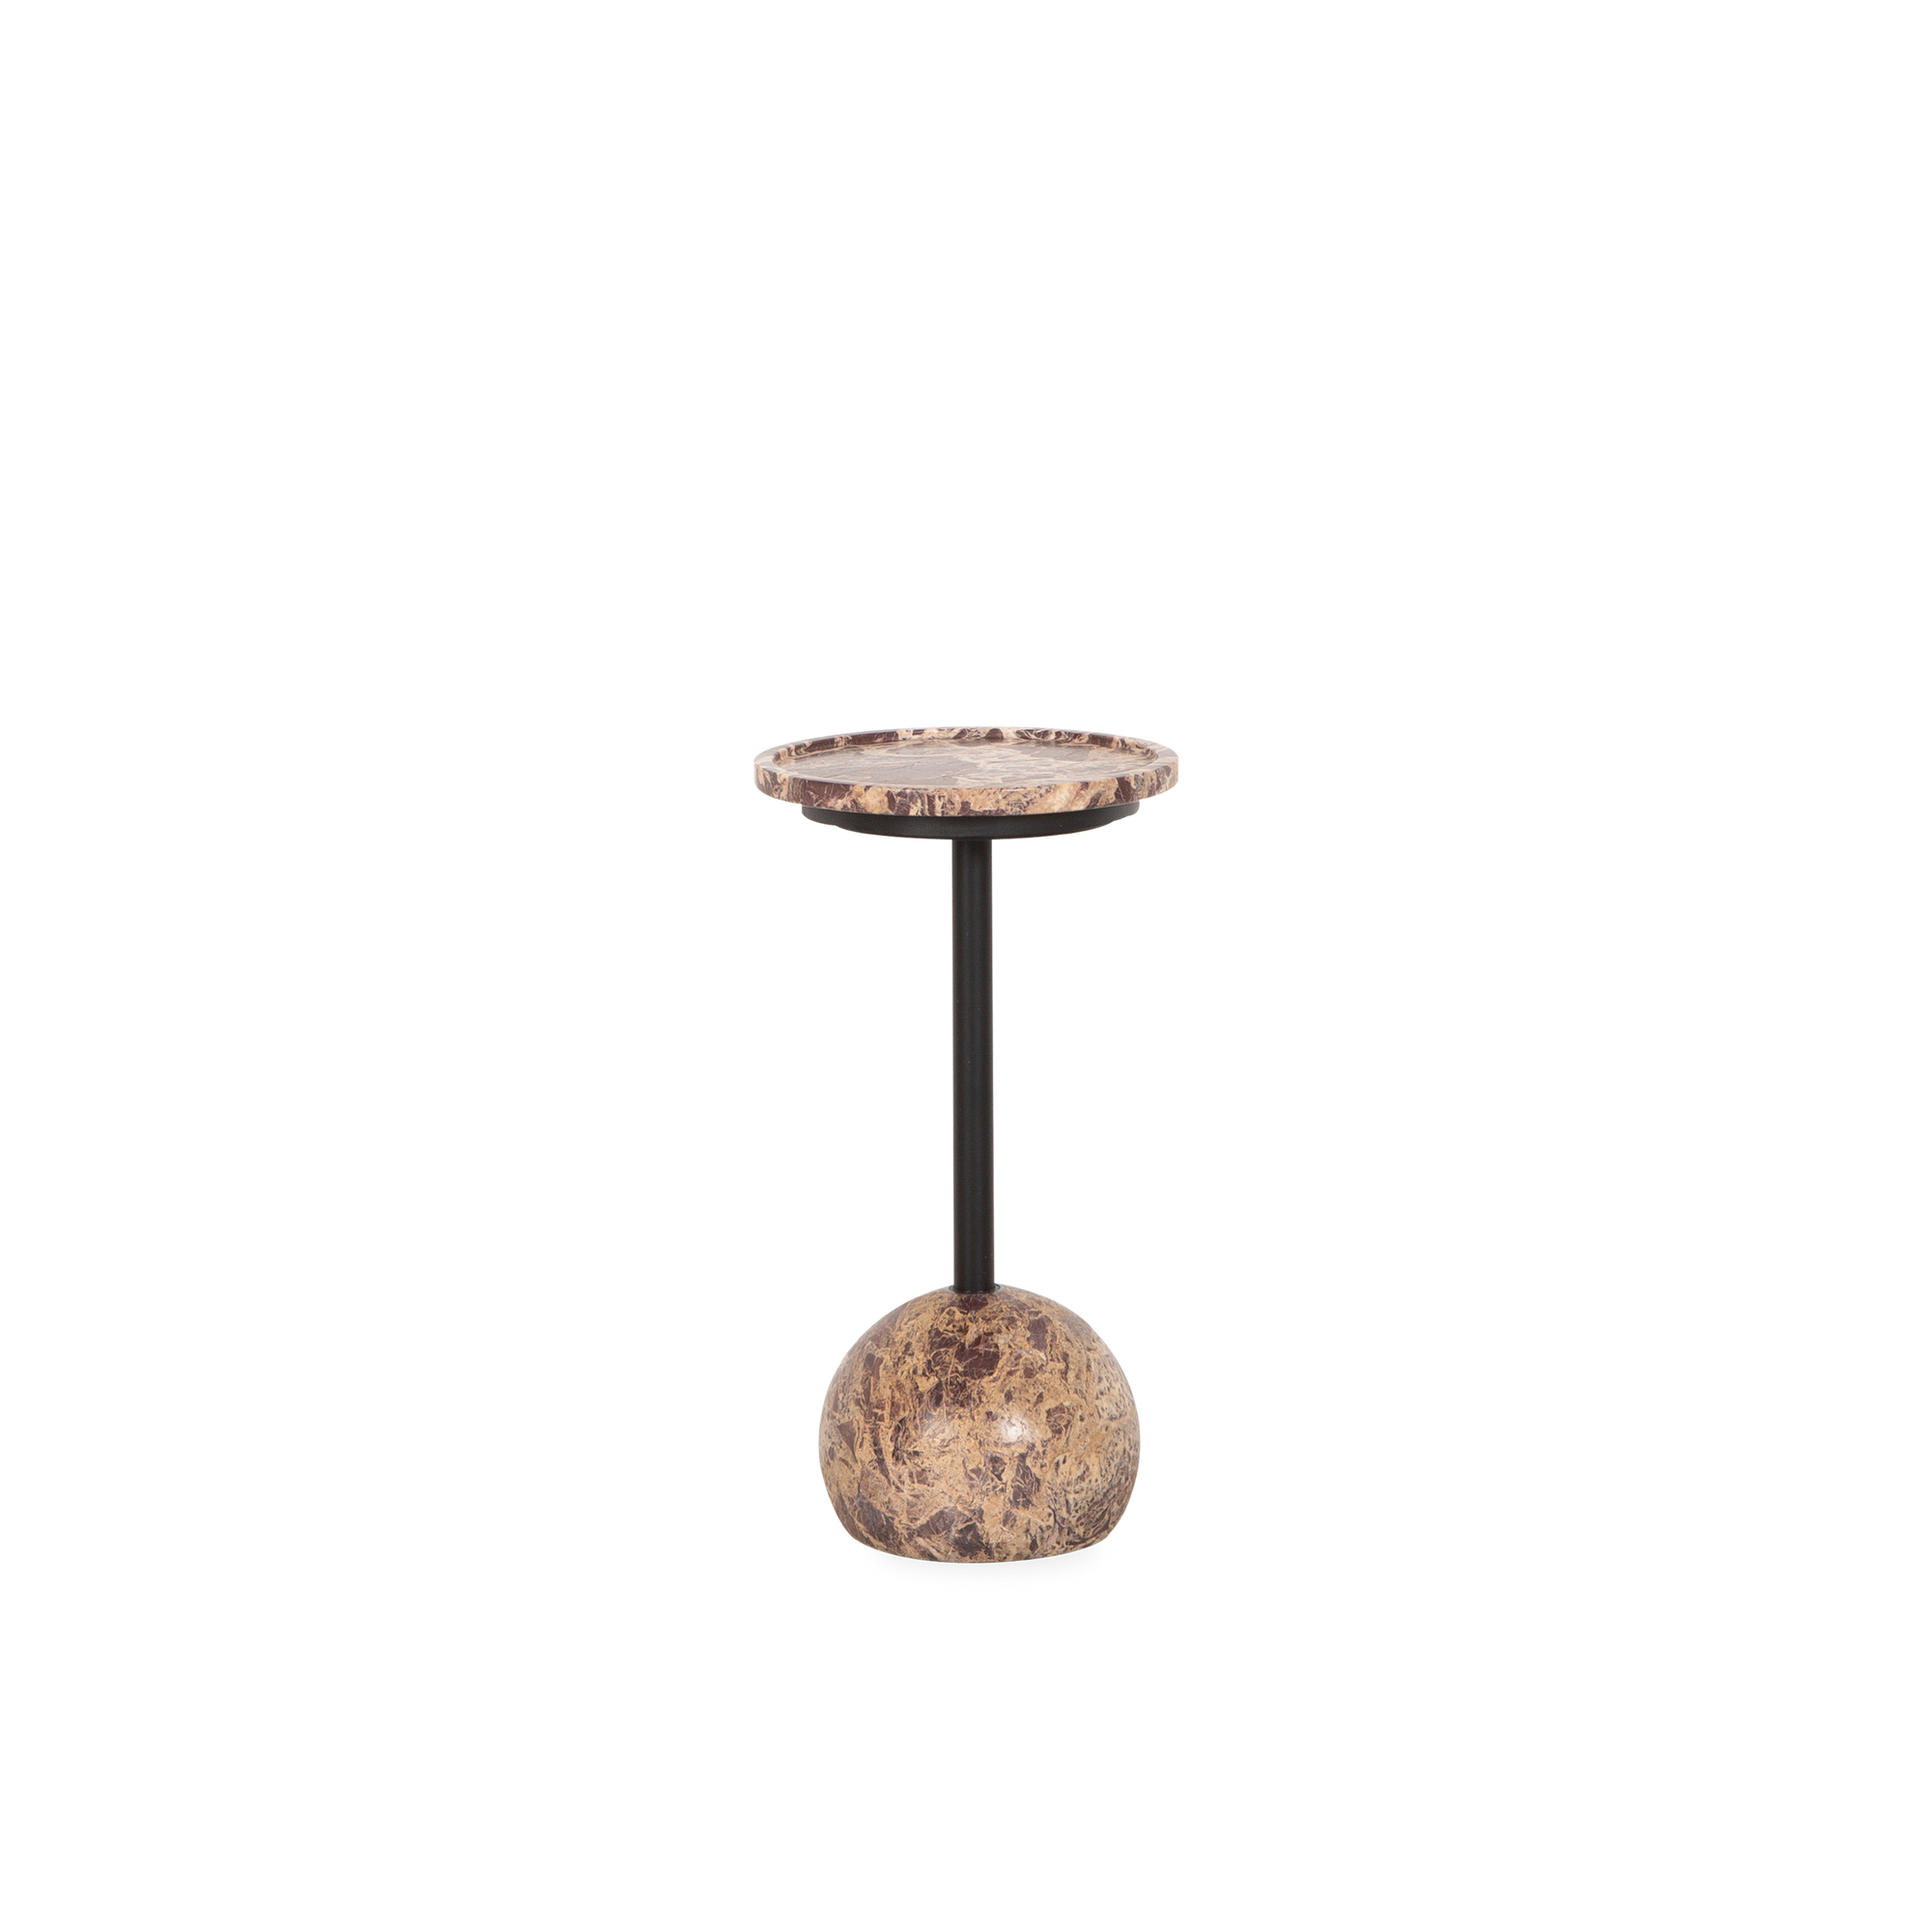 Crafted with precision from luxurious merlot marble, the Vance Pull Up Table brings a touch of opulence to any space.